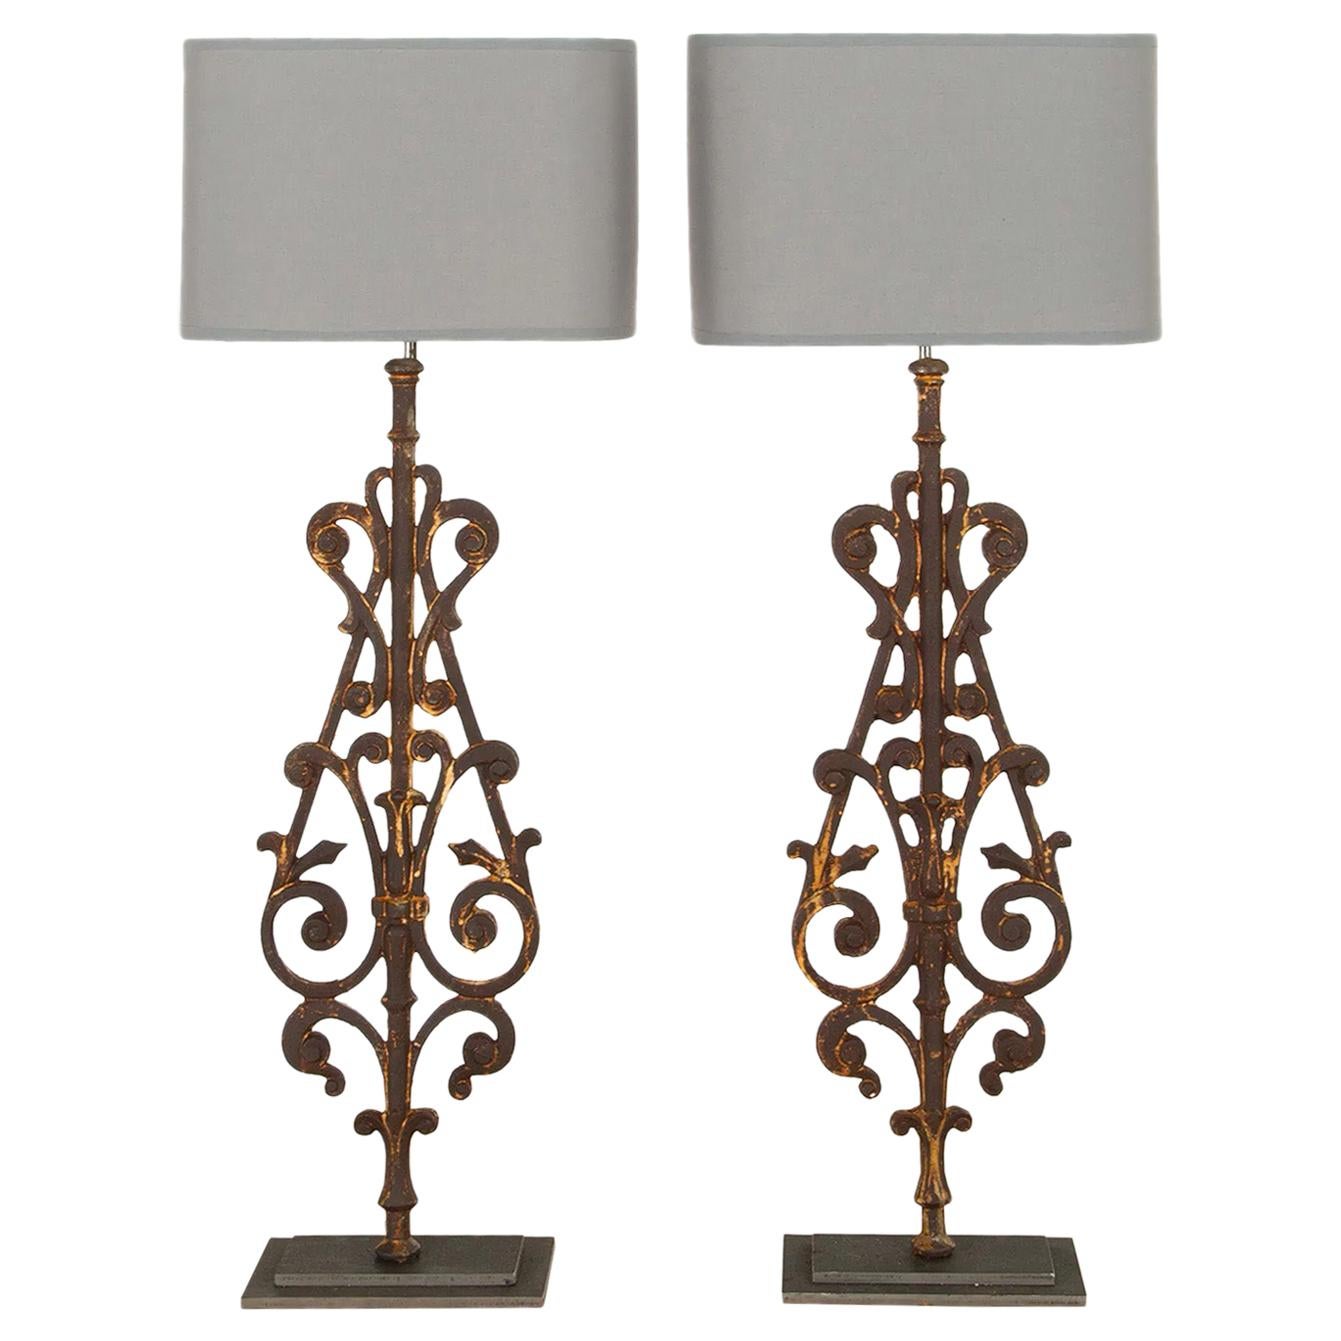 Pair of 19th Century Balustrade Lamps